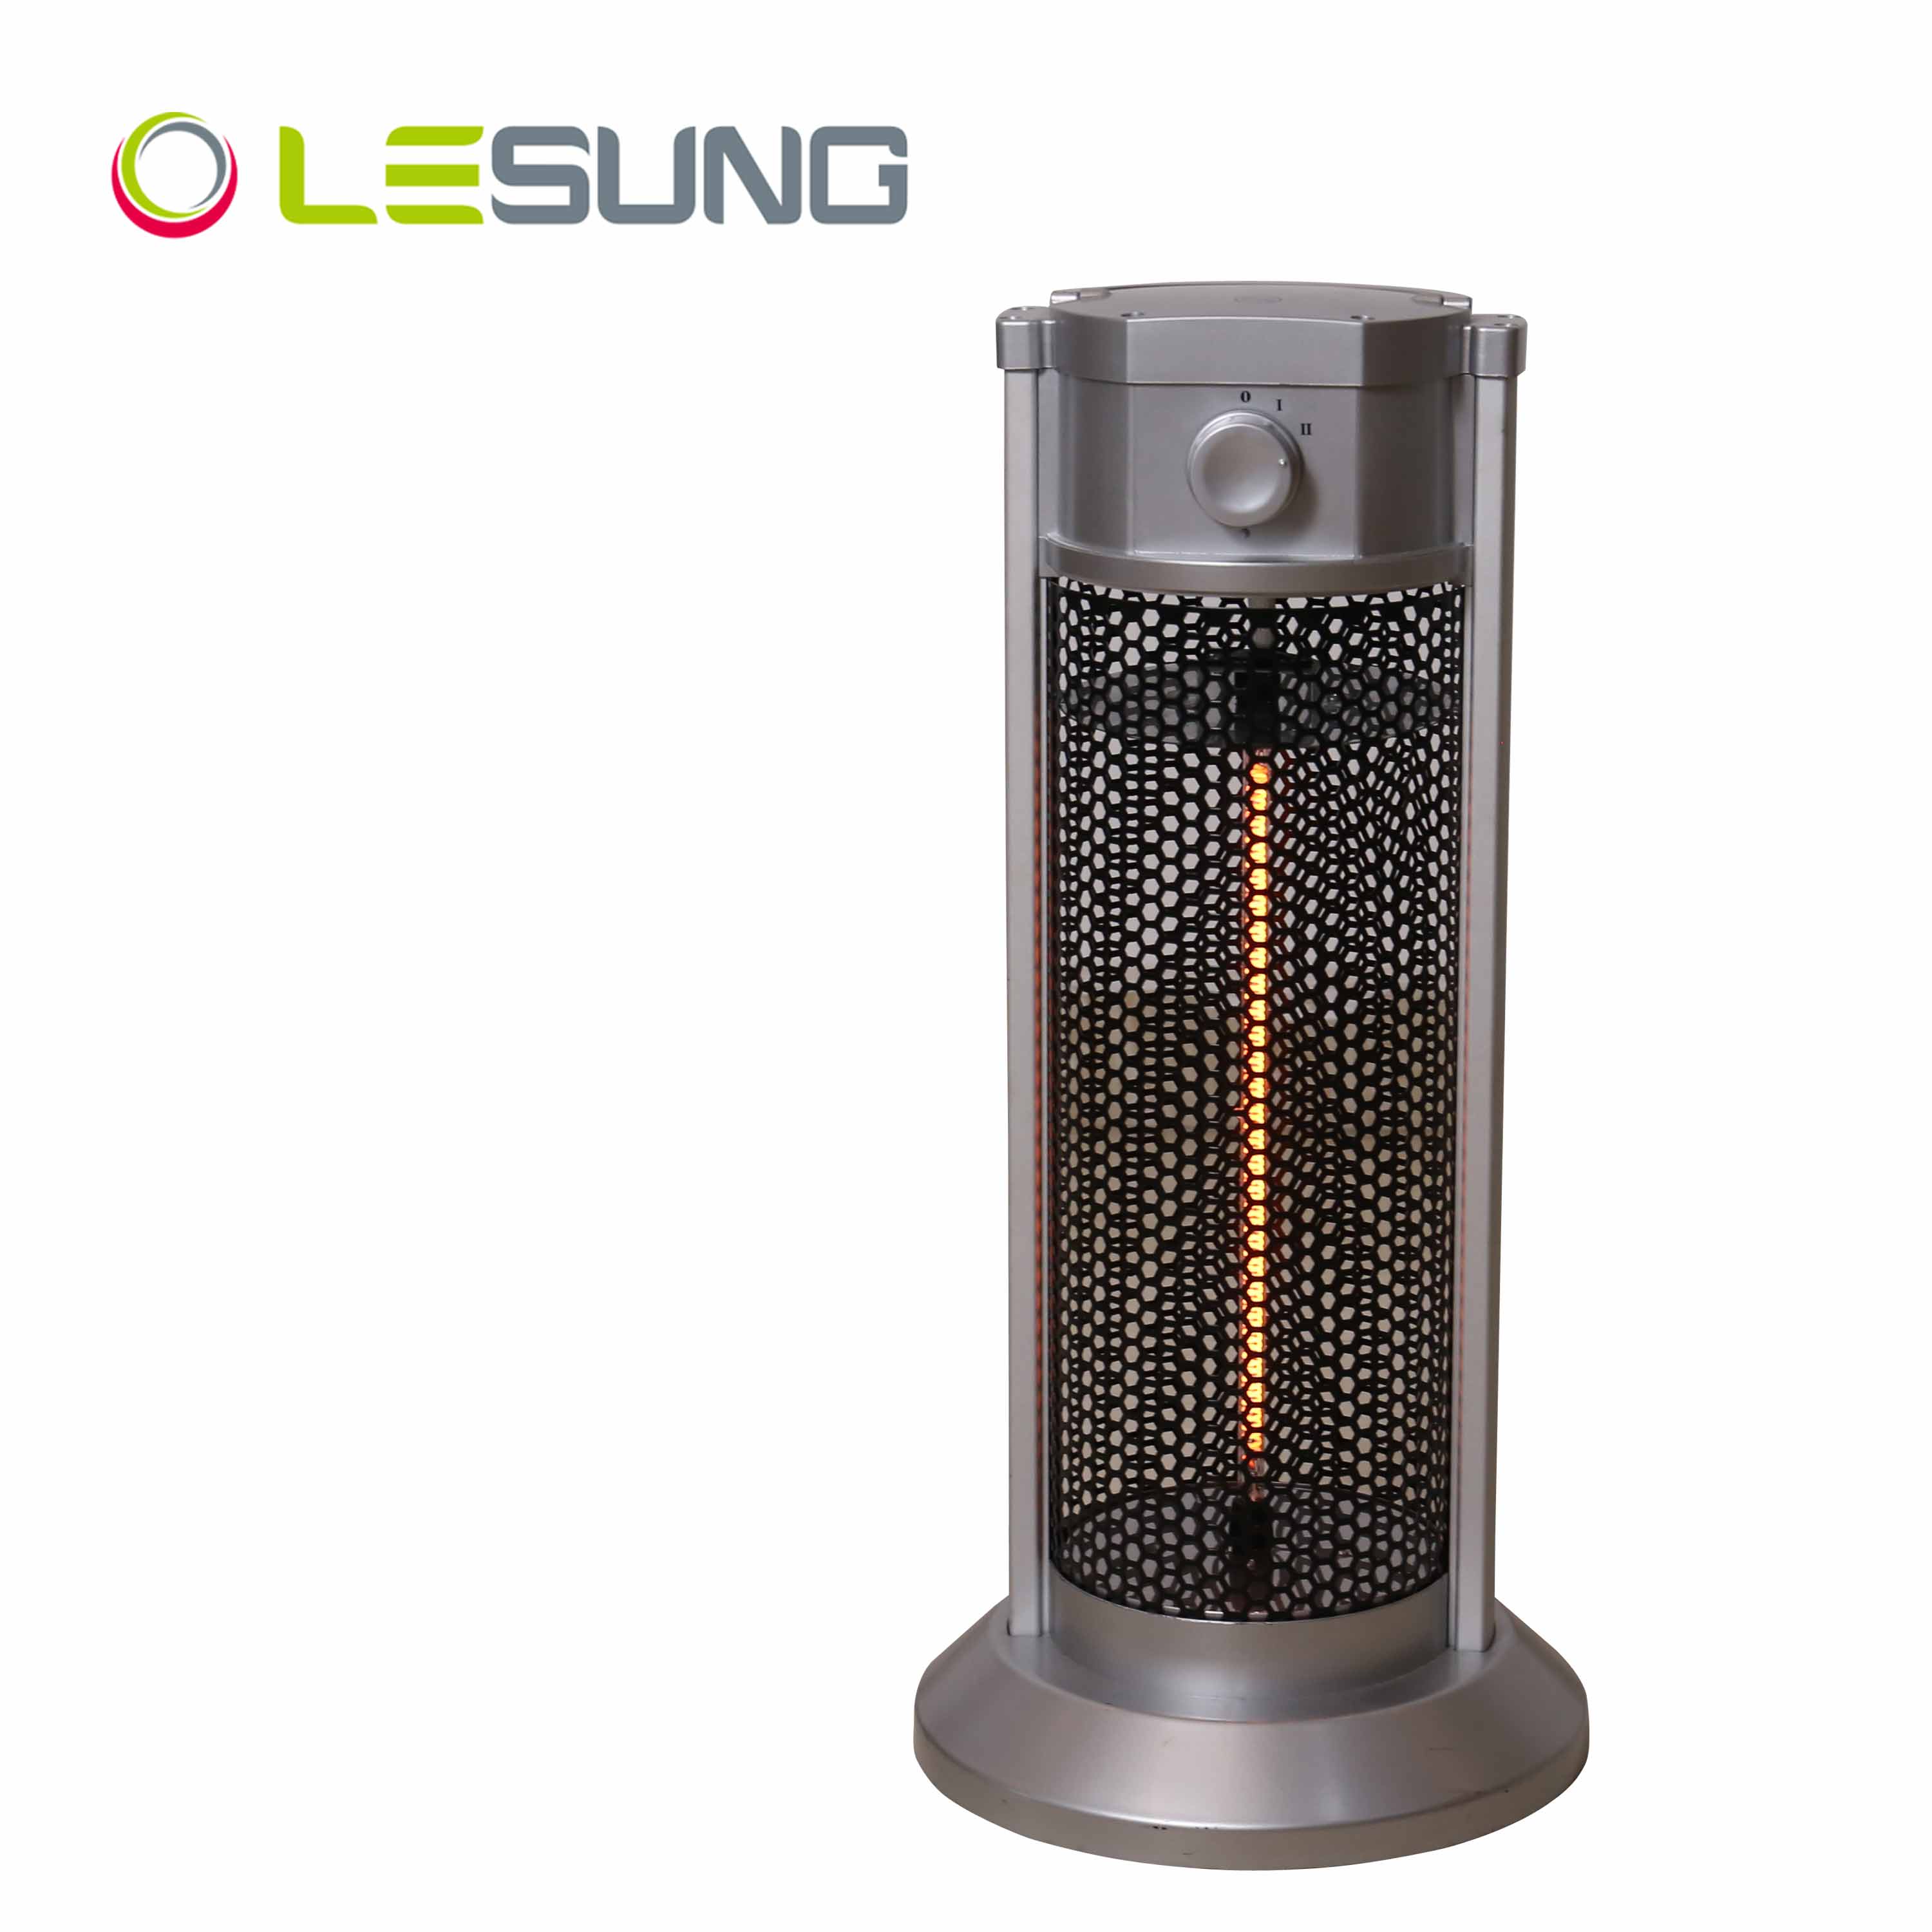 Which Electric Heater is good?